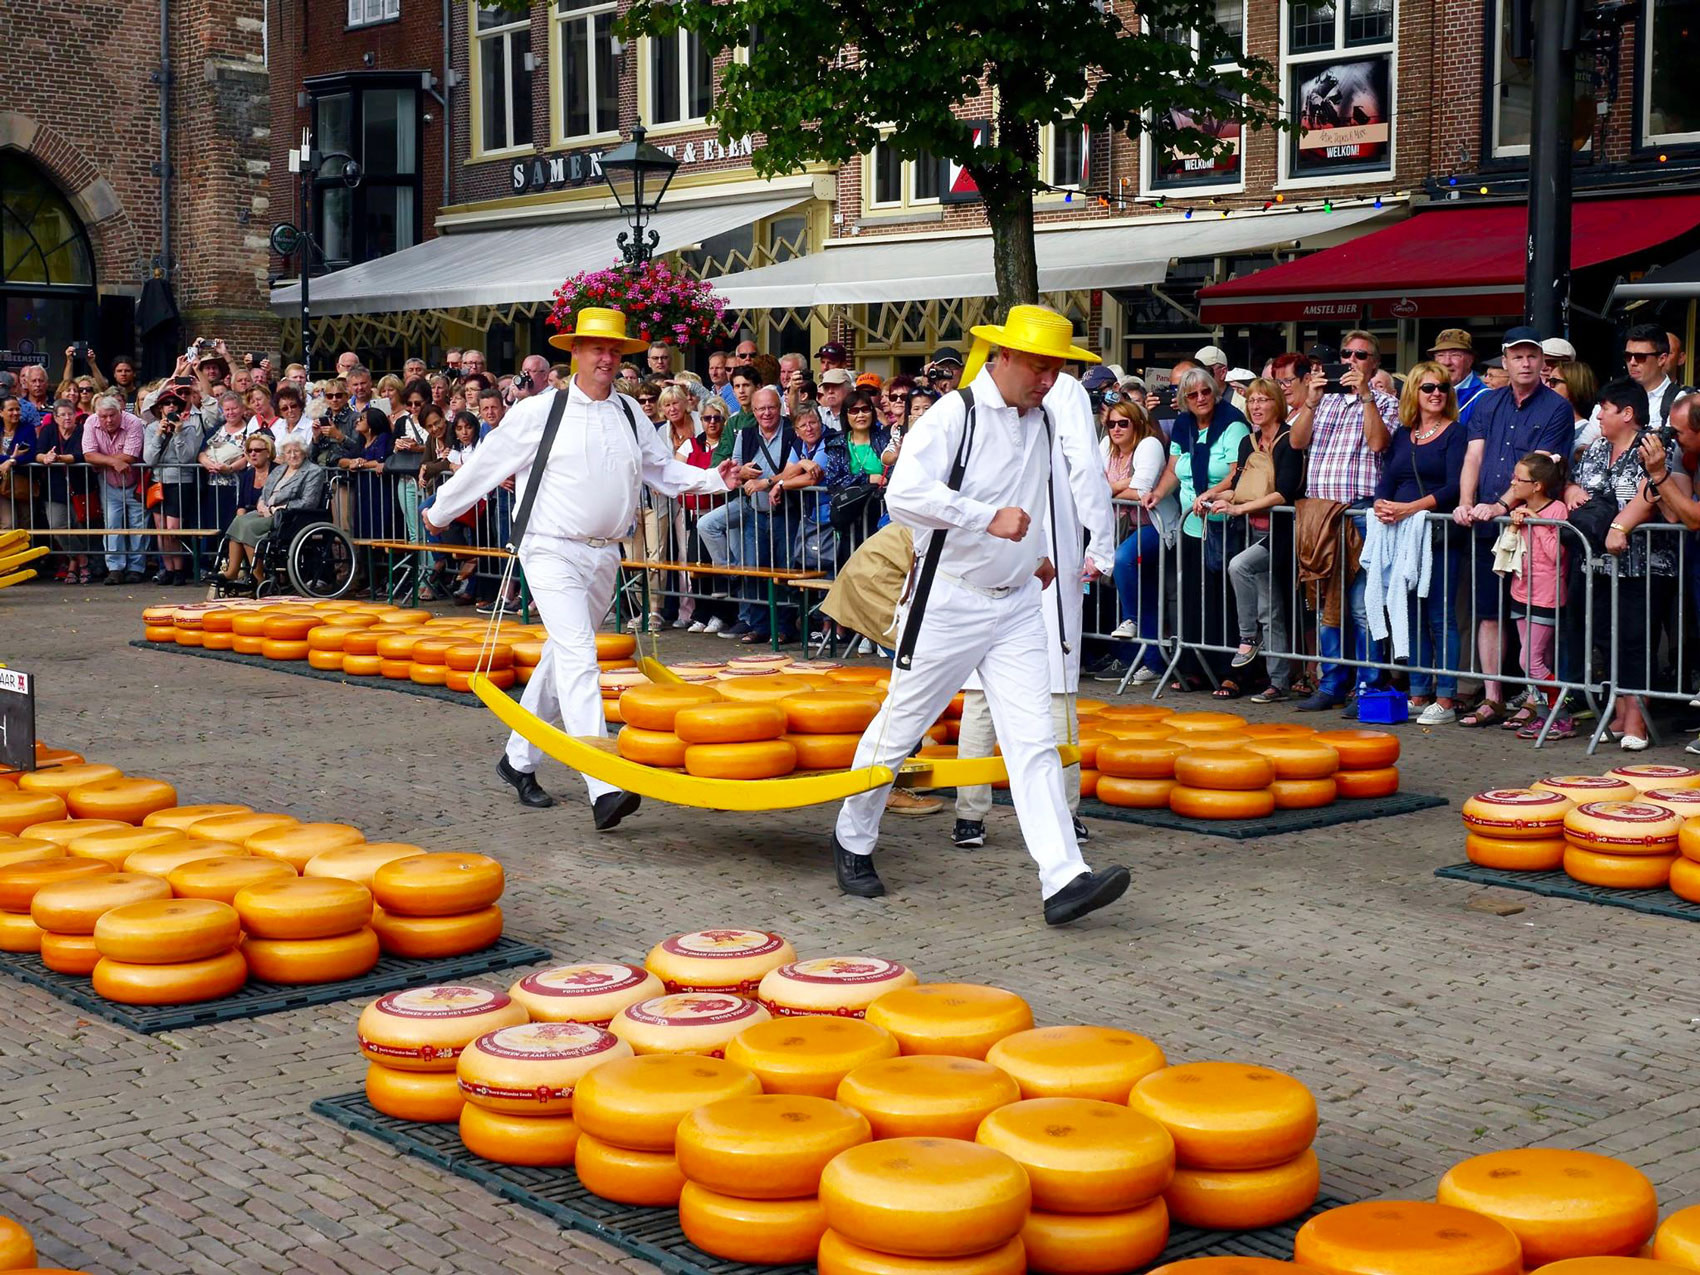 Cheese Market in The Netherlands